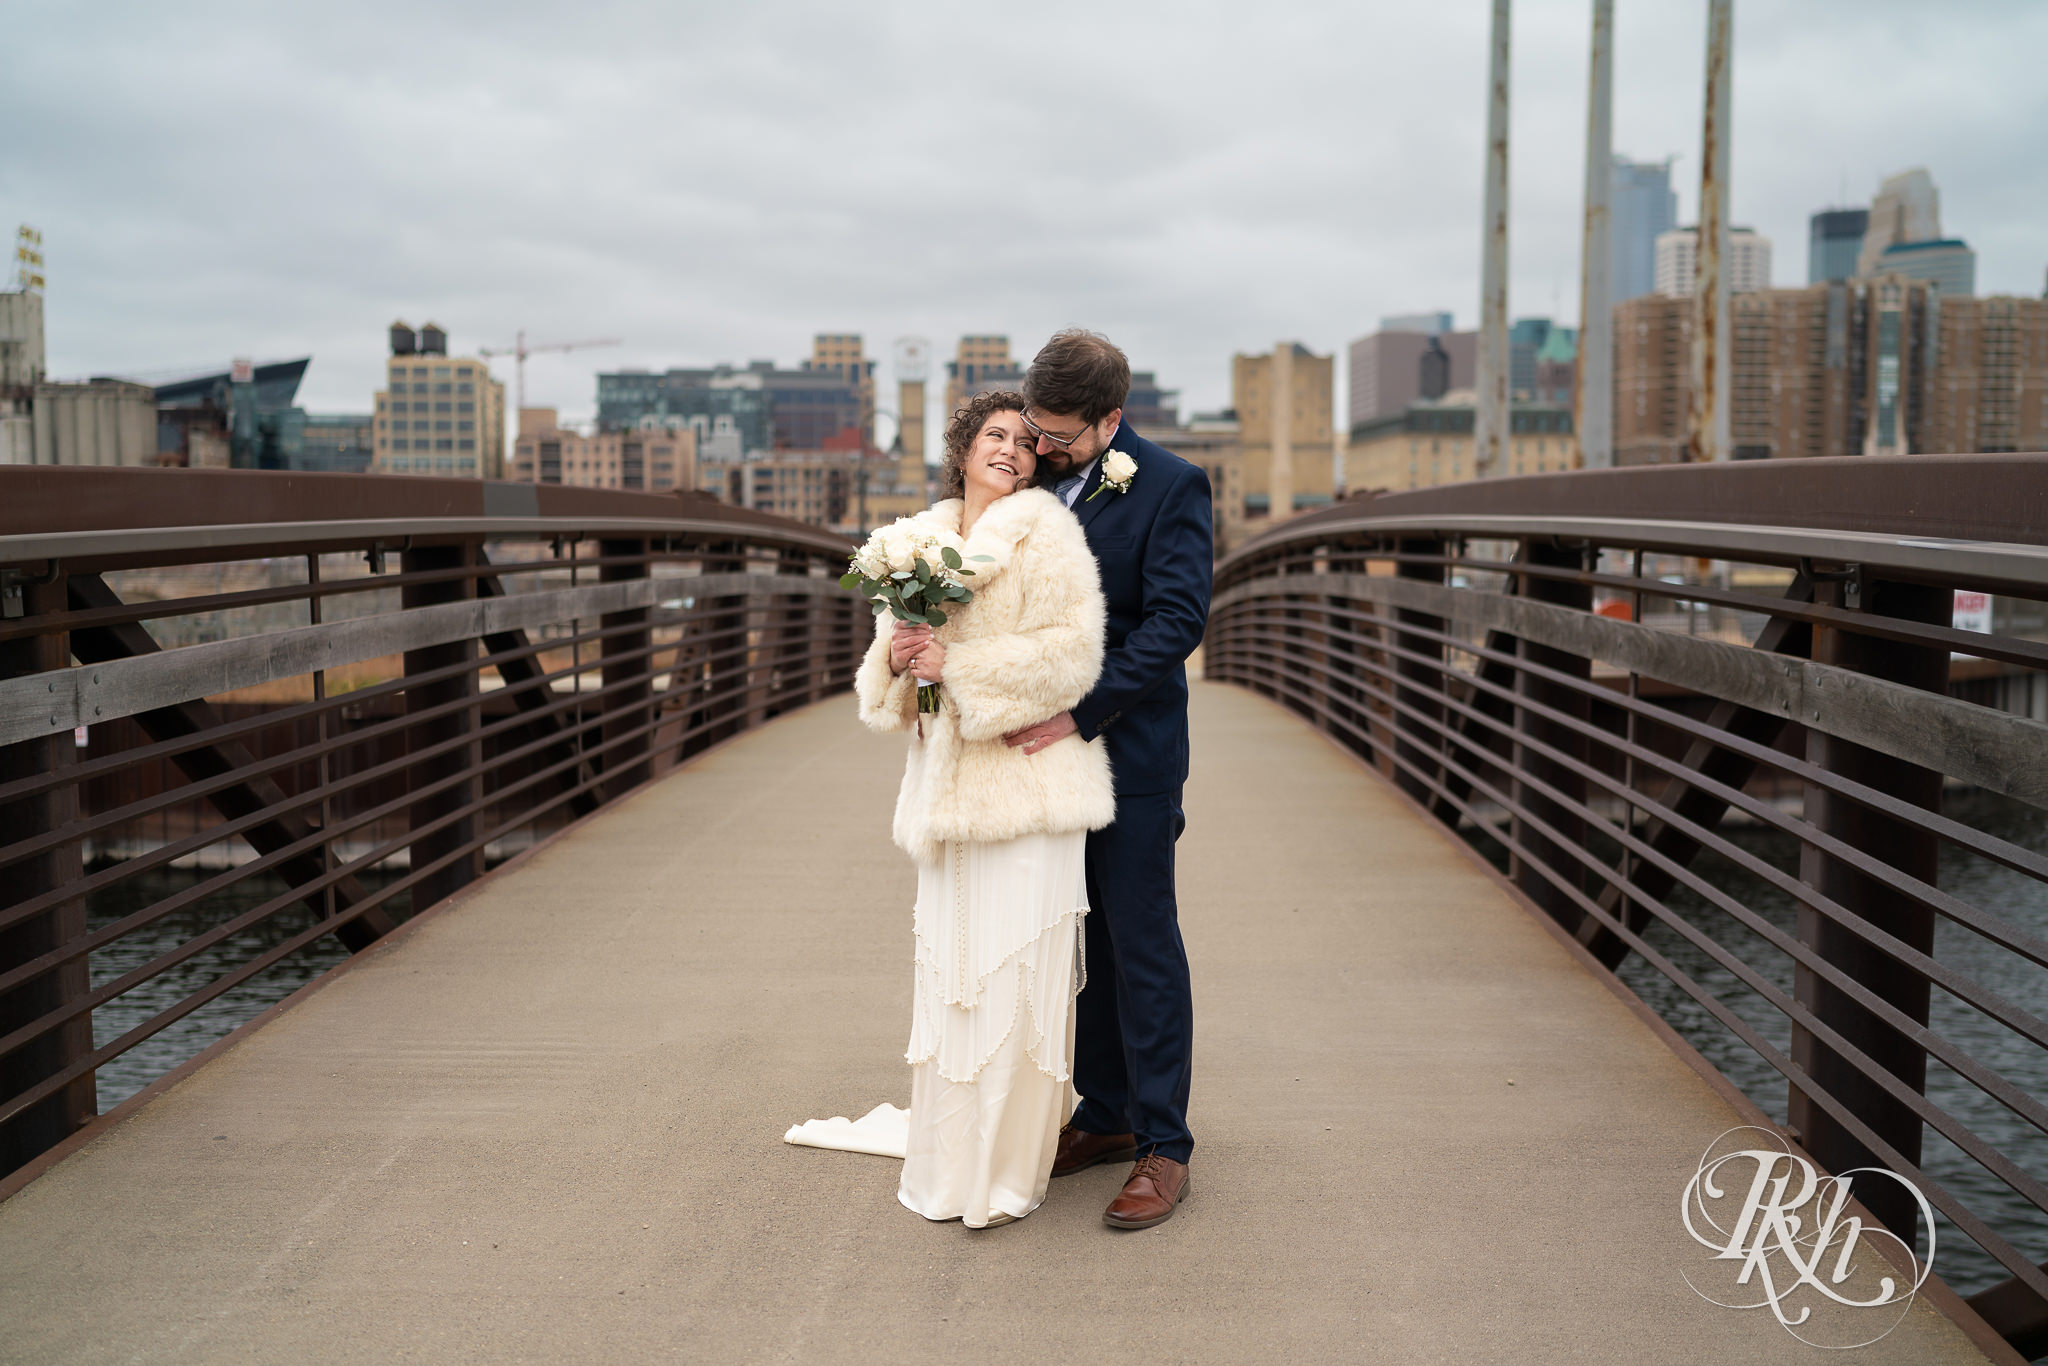 Bride and groom hugging and looking at each other on bridge with Minneapolis skyline in the background.